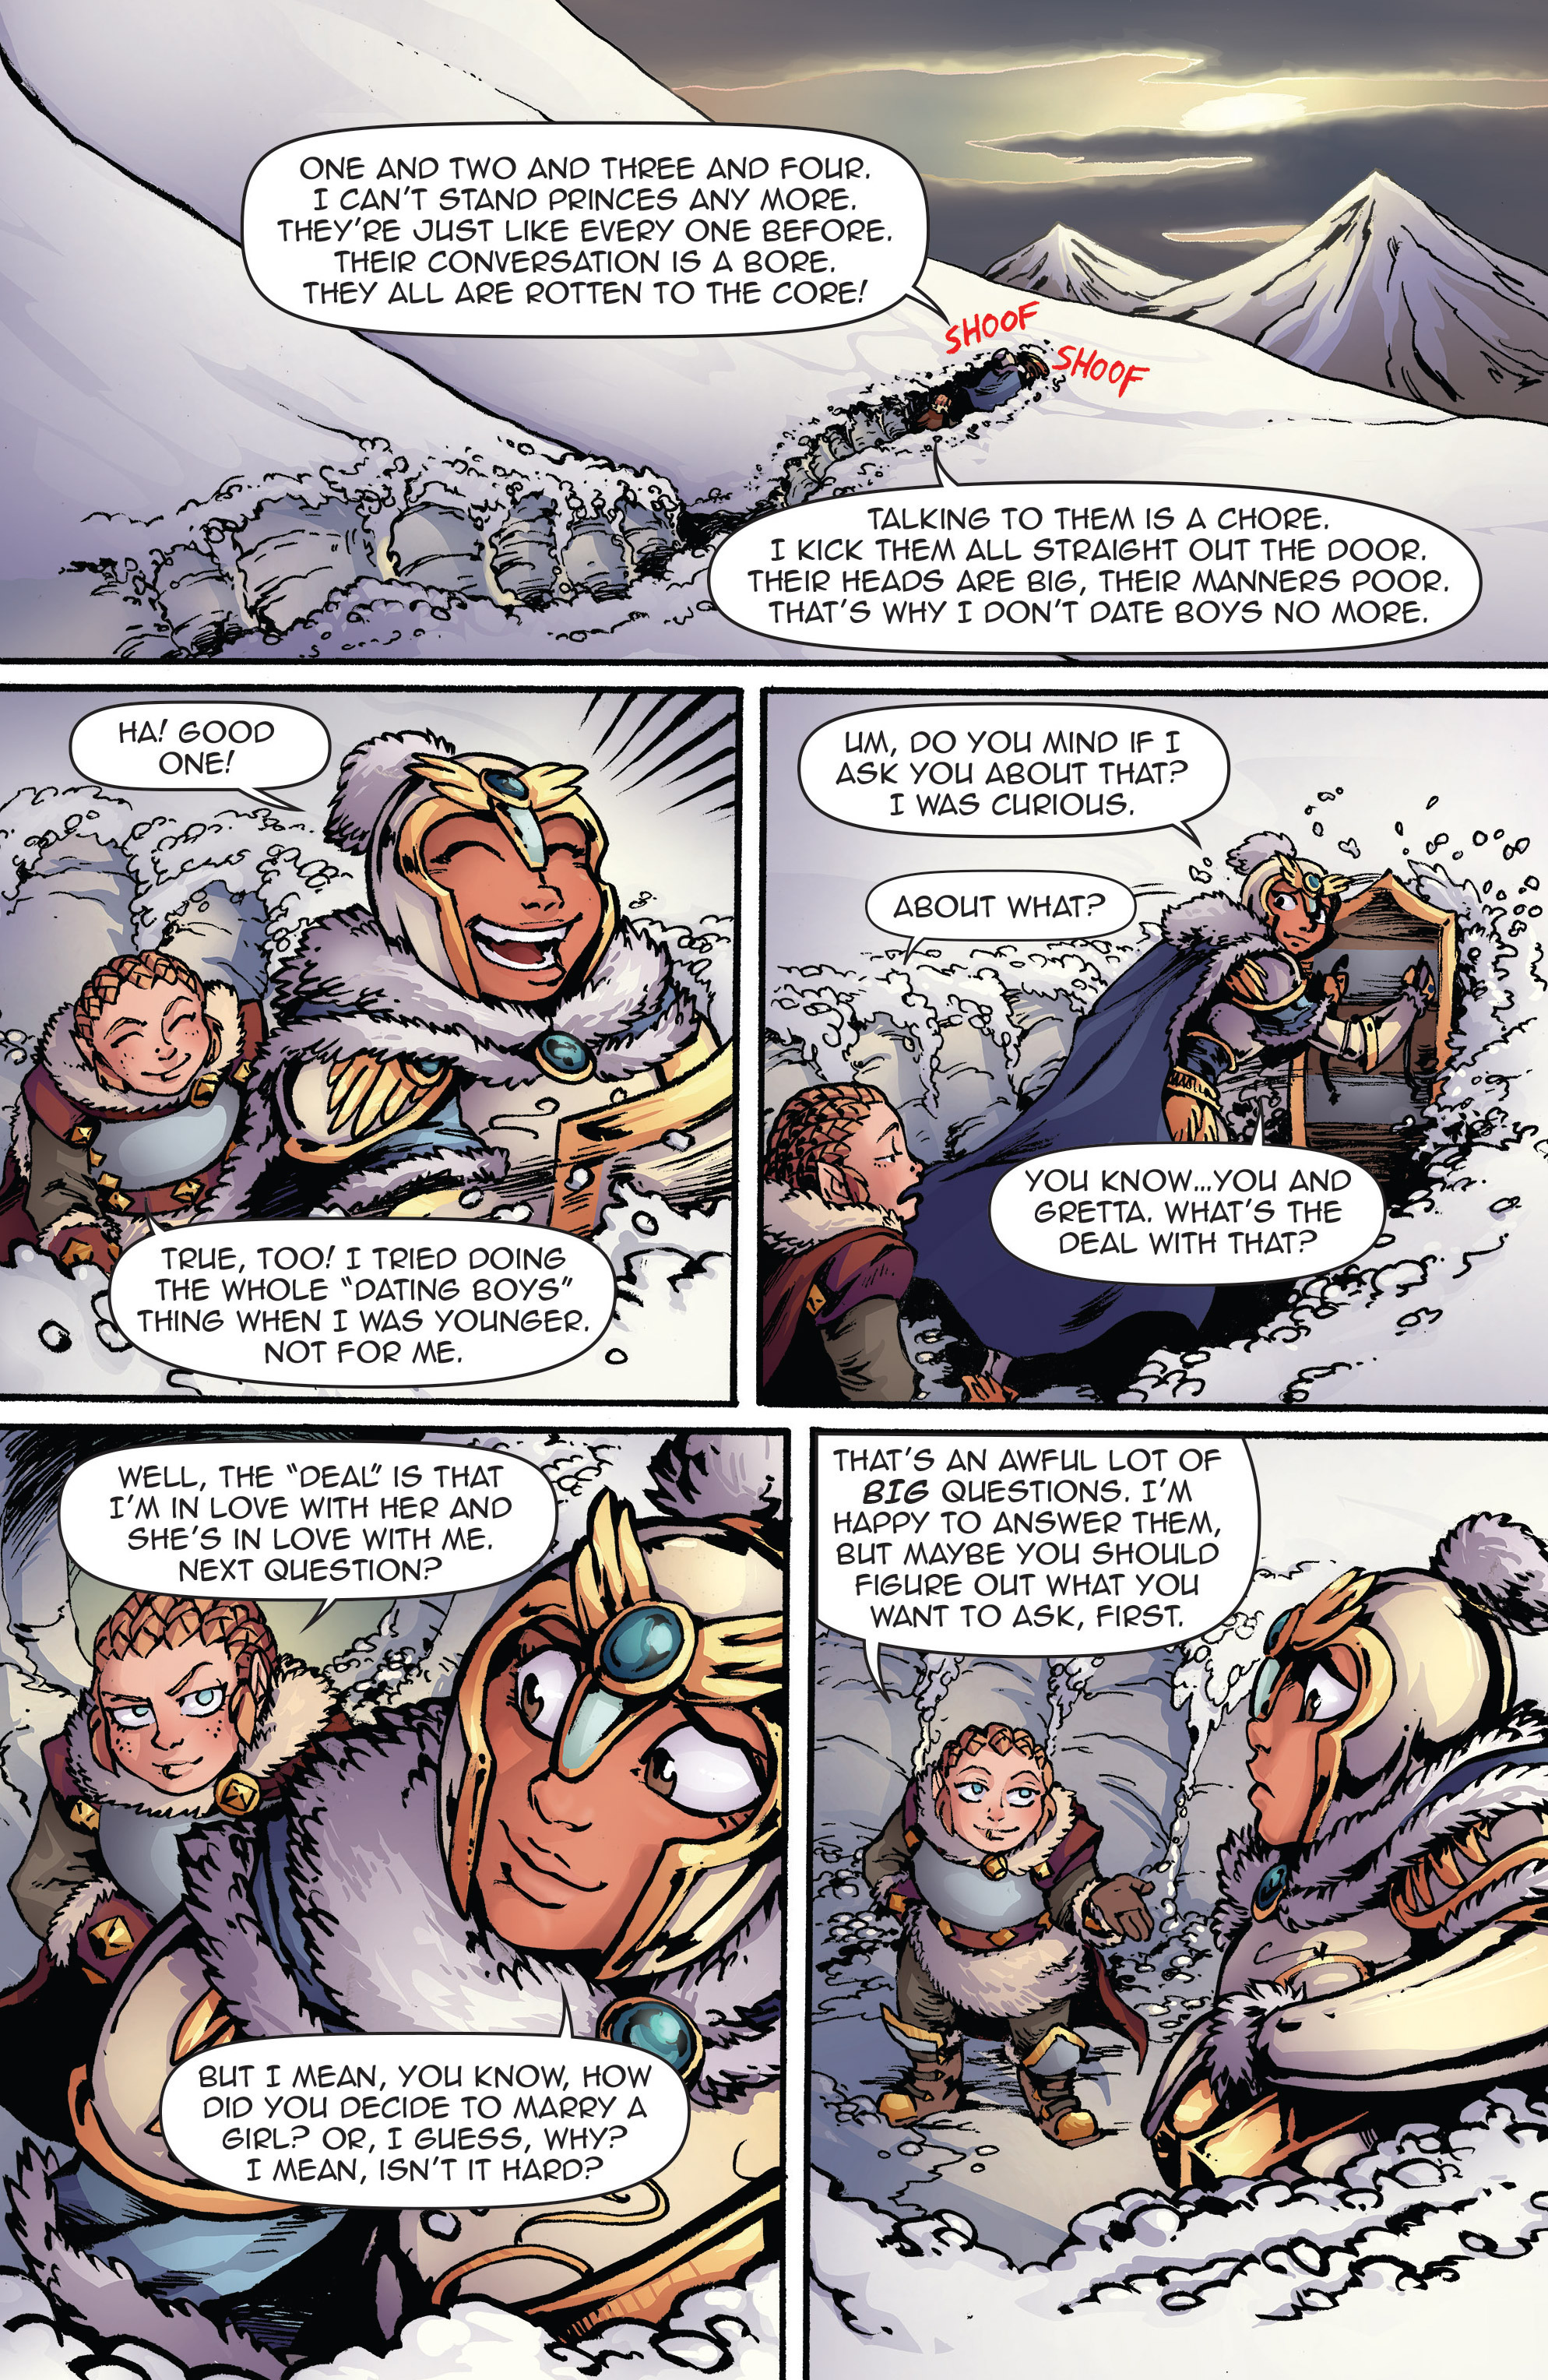 Read online Princeless: Make Yourself comic -  Issue #3 - 16